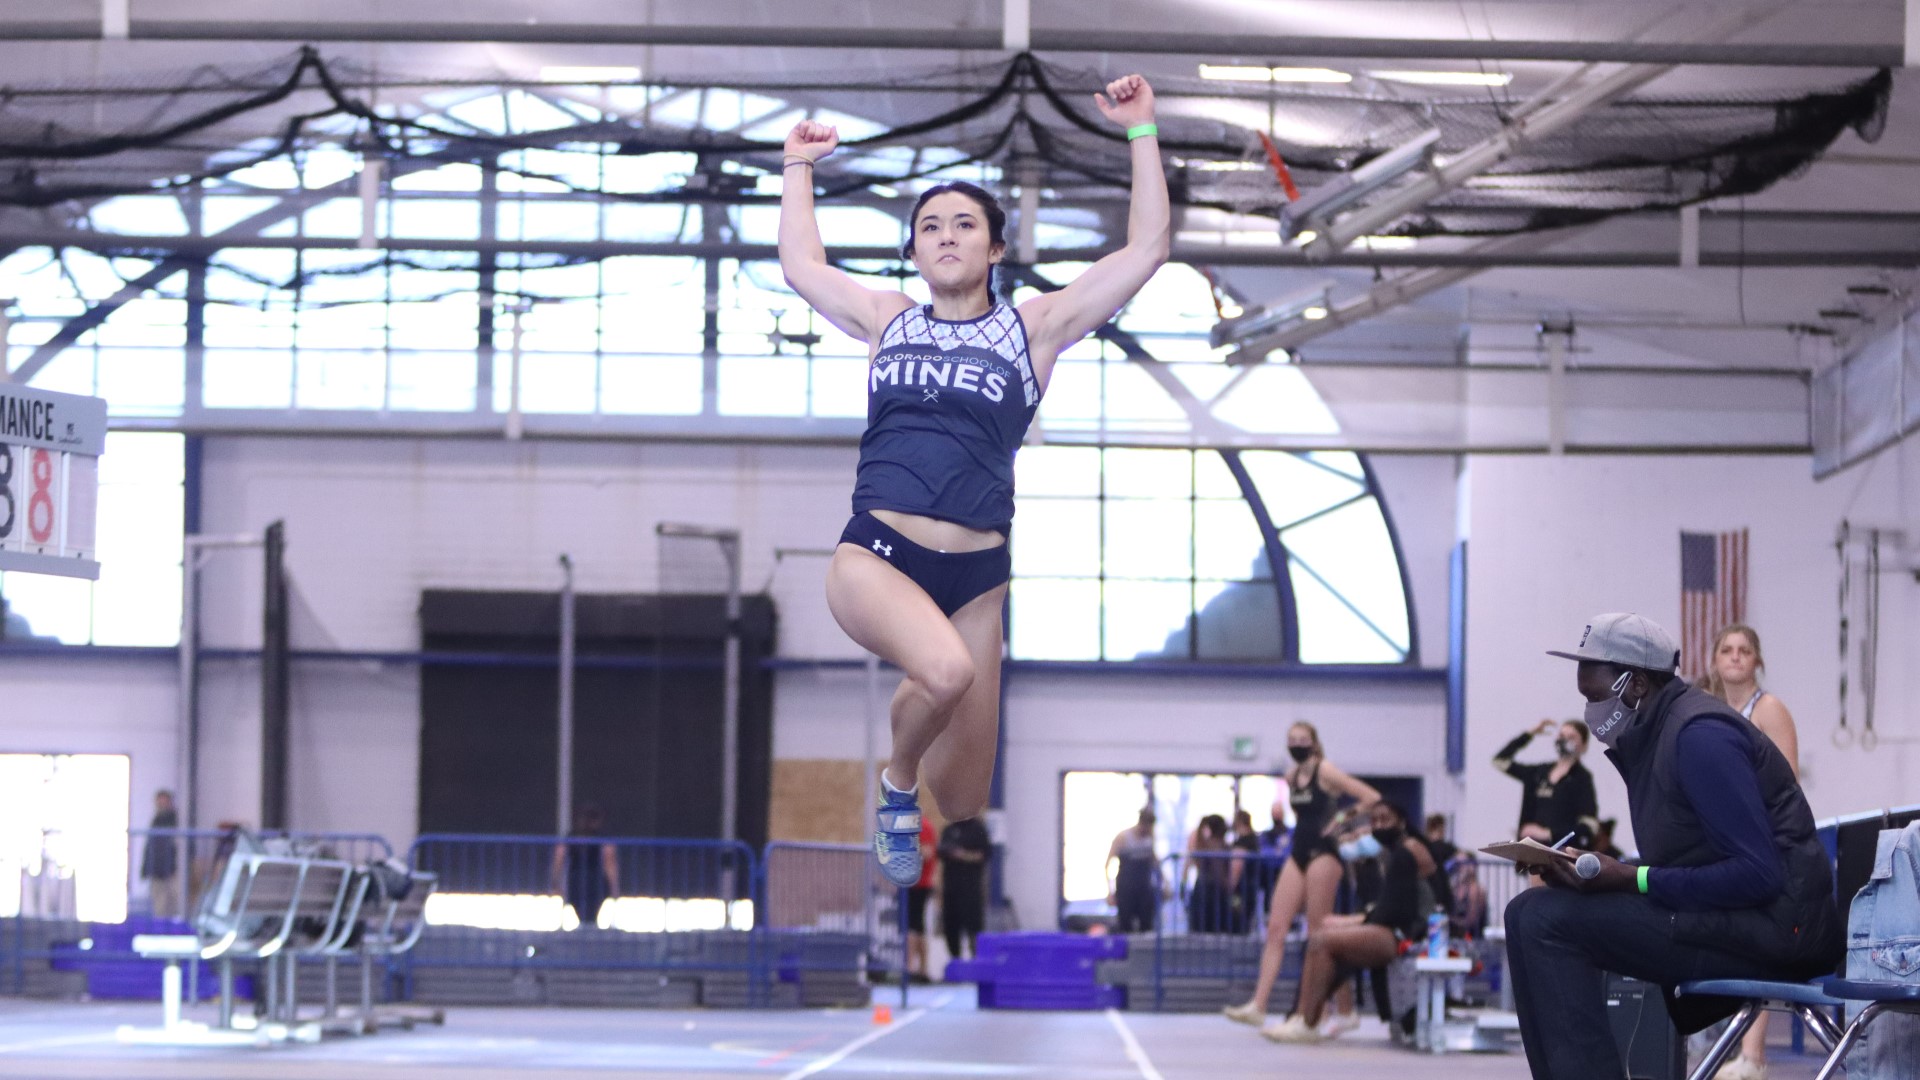 With a mark of 5.98, junior Sophie Collins set a personal and school record, as well as the second-longest mark in DII at the time. She also qualified for nationals.